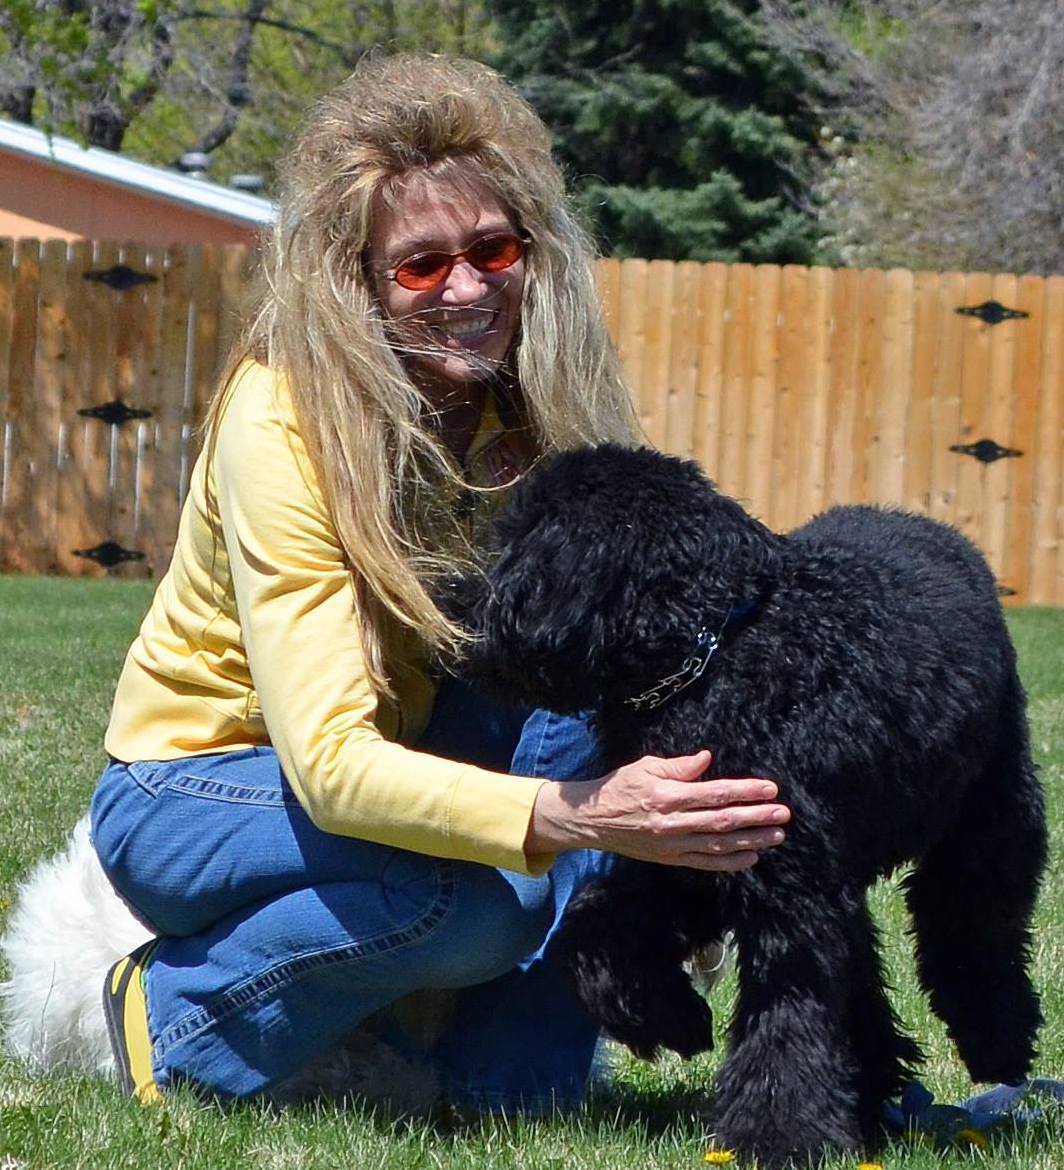 Dog training classes in Colorado is offered by Sandra Lynn